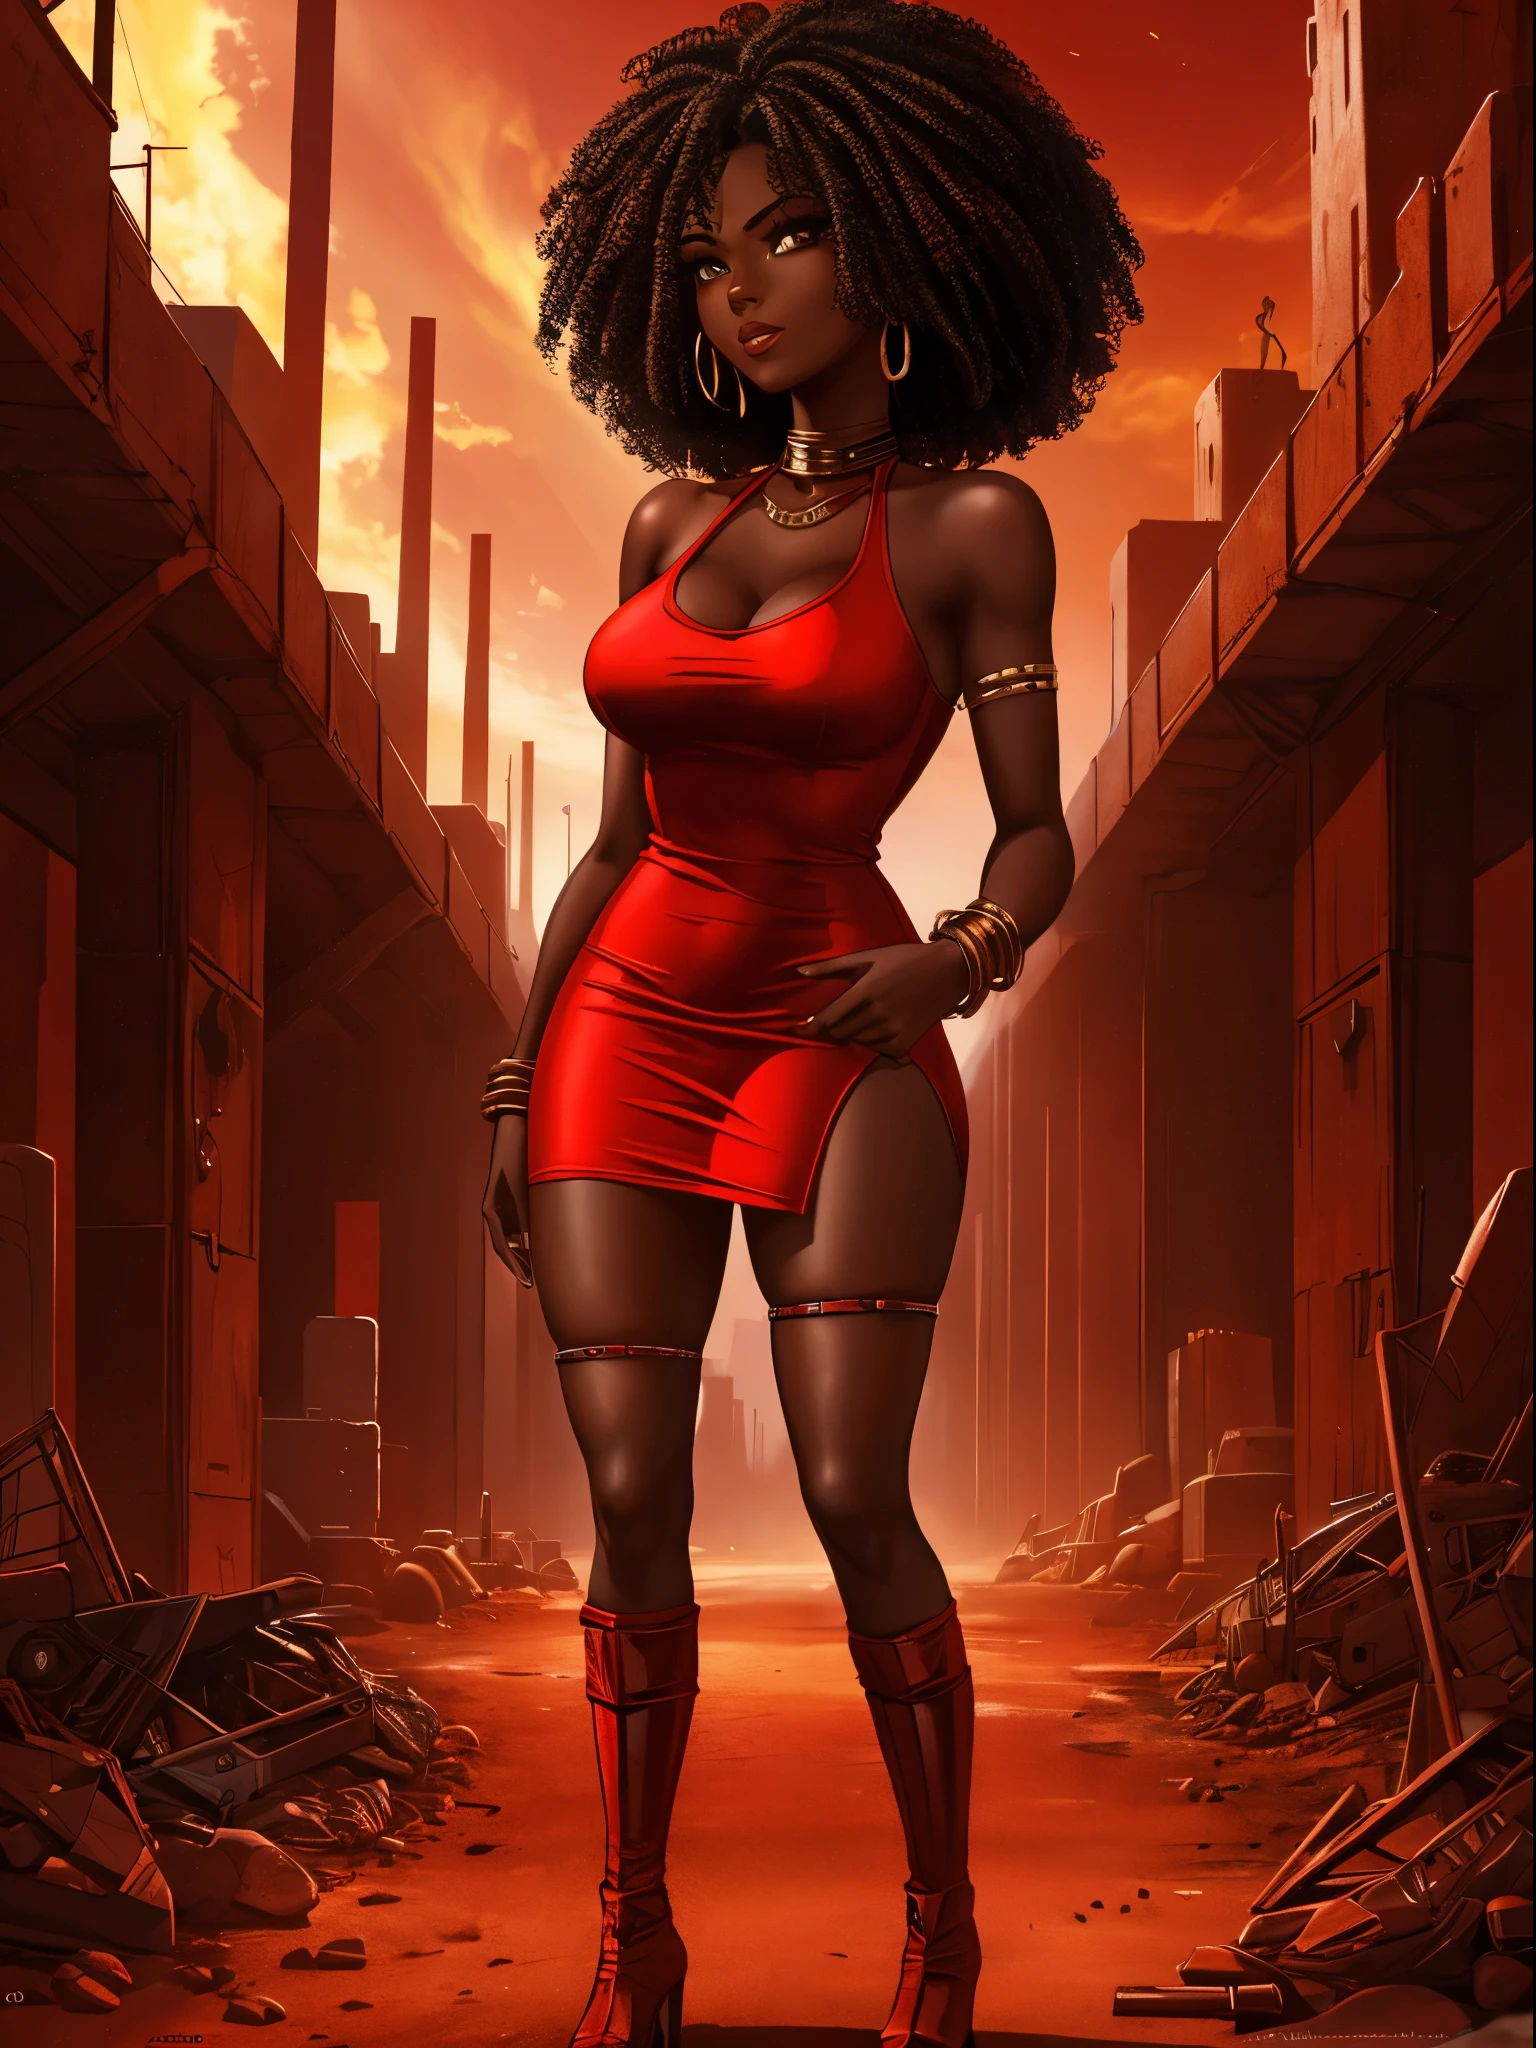 19-year-old woman, dark skin, short curly hair down to her shoulders, dressed in a red minidress, clubbing outfit, apocalyptic wasteland, daytime, good lighting, desert, rusted hulks